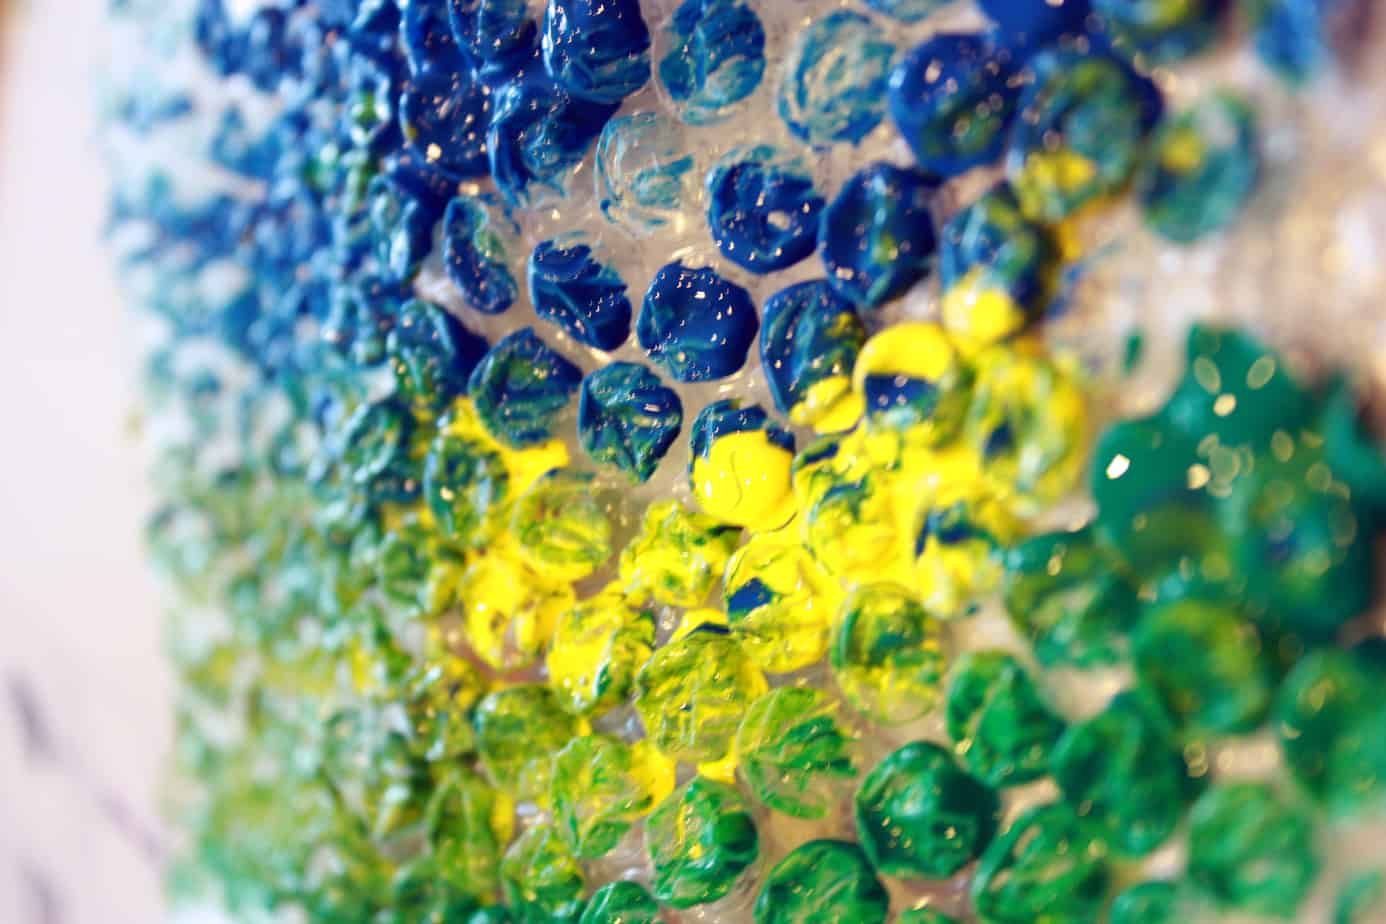 Stomp painting can be a fun activity with your child or loved one - just get some bubble wrap and paint.